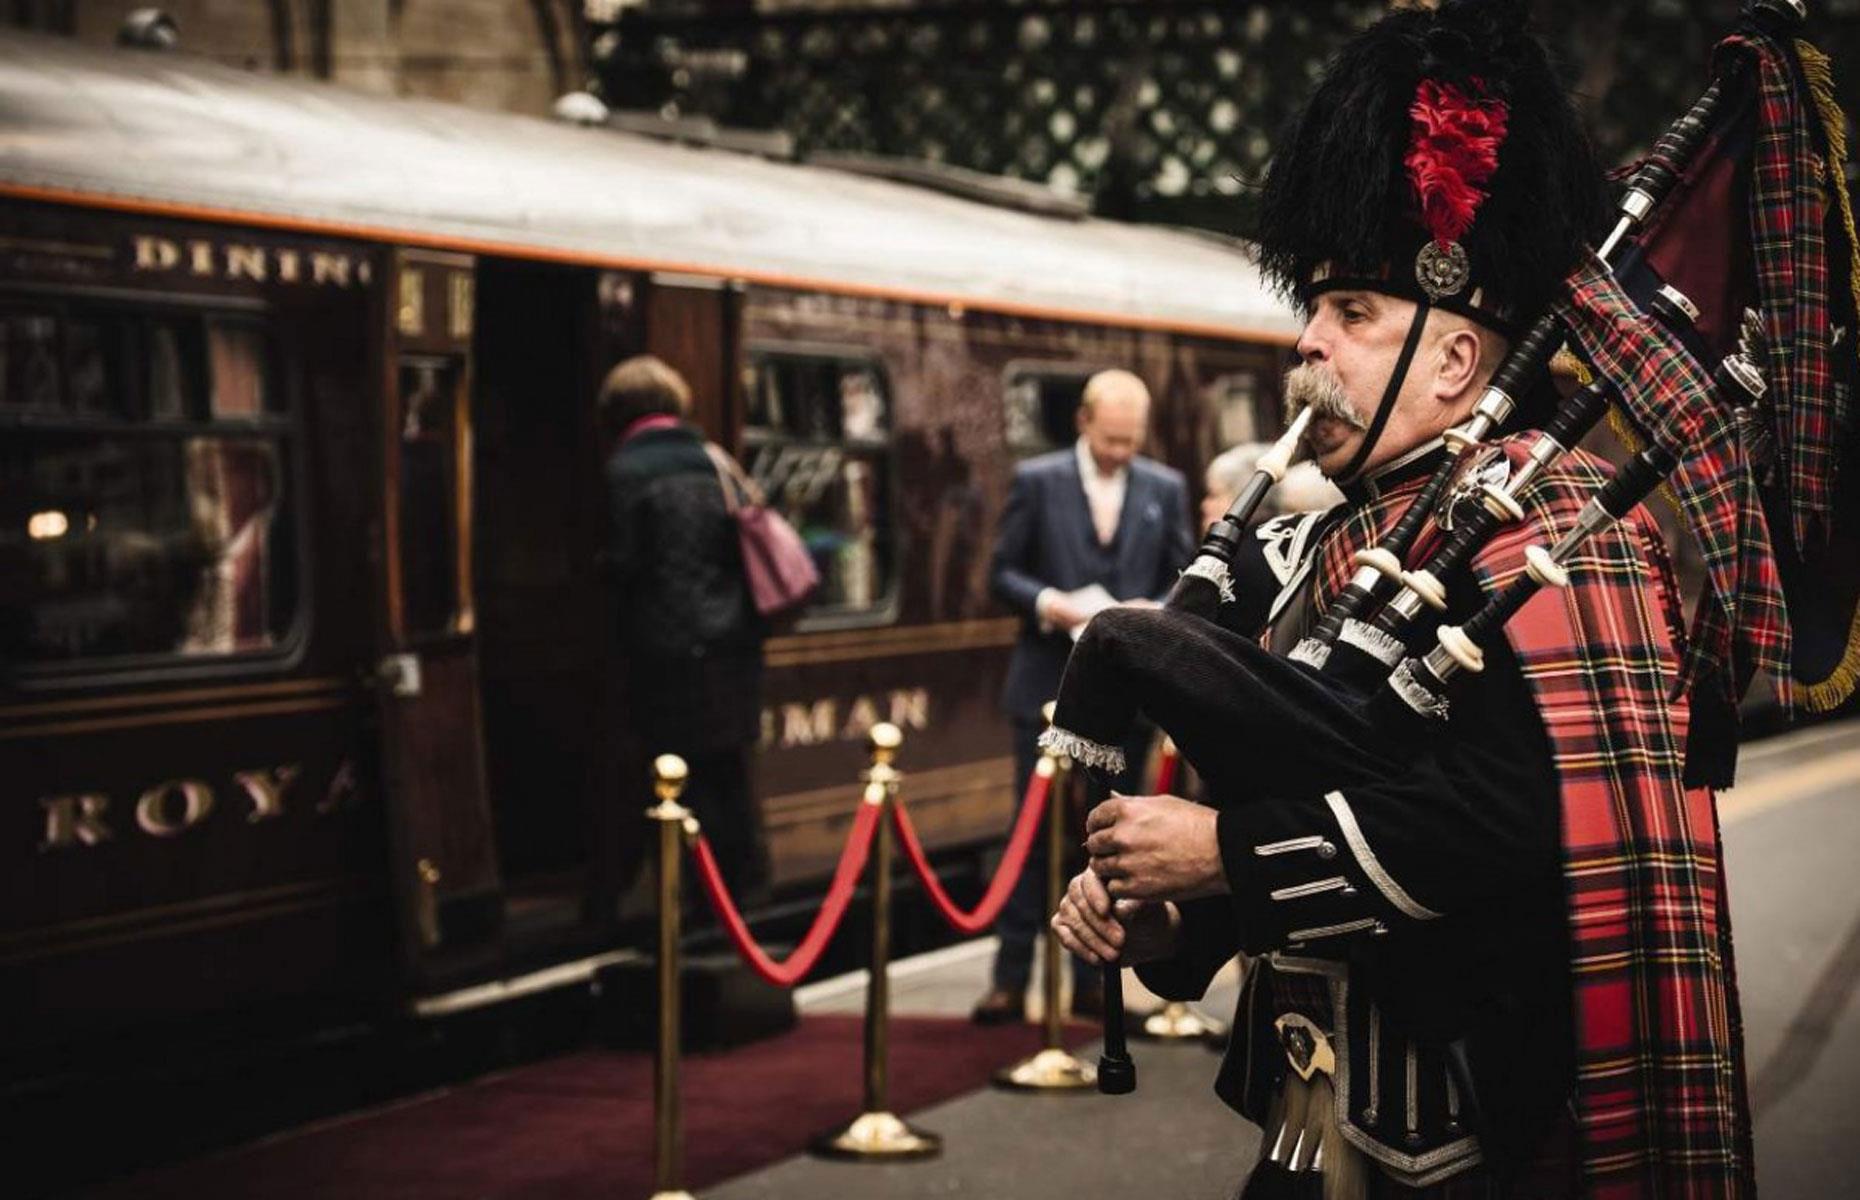 <p>Another jewel in Belmond's crown, the <em>Royal Scotsman</em> has been traversing Caledonia's glorious Highlands and Lowlands since 1985. It now offers 12 services that depart from and return to Edinburgh.</p>  <p>Richly decorated with mahogany paneling and fine tweed and tartan furnishings, the train's carriages include two dining cars where the onboard chefs work magic with the finest Scottish ingredients, such as Aberdeen Angus beef and wild salmon.</p>